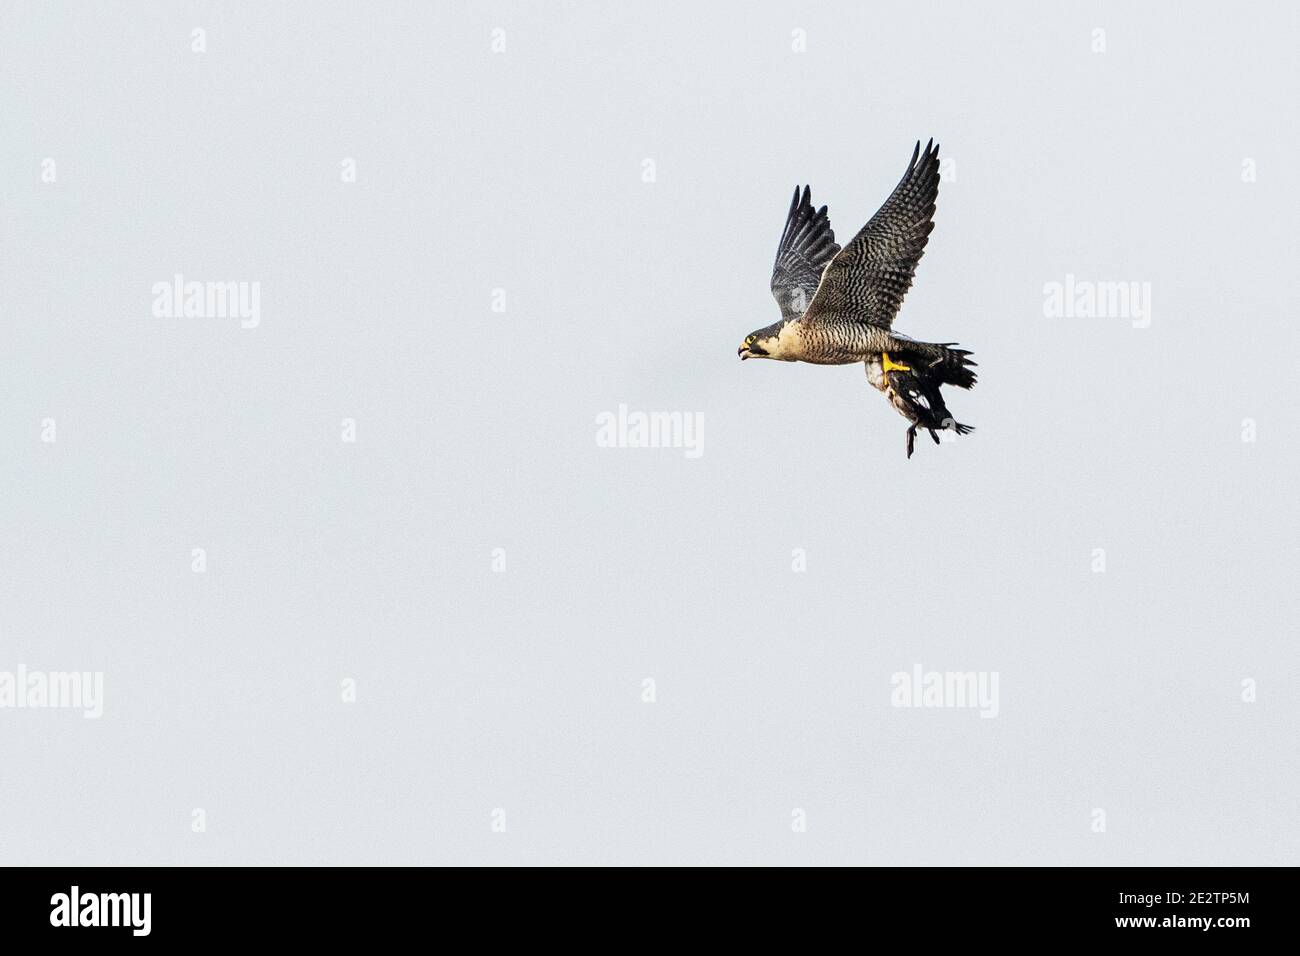 Adult peregrine falcon flight, carrying waterfowl prey Stock Photo